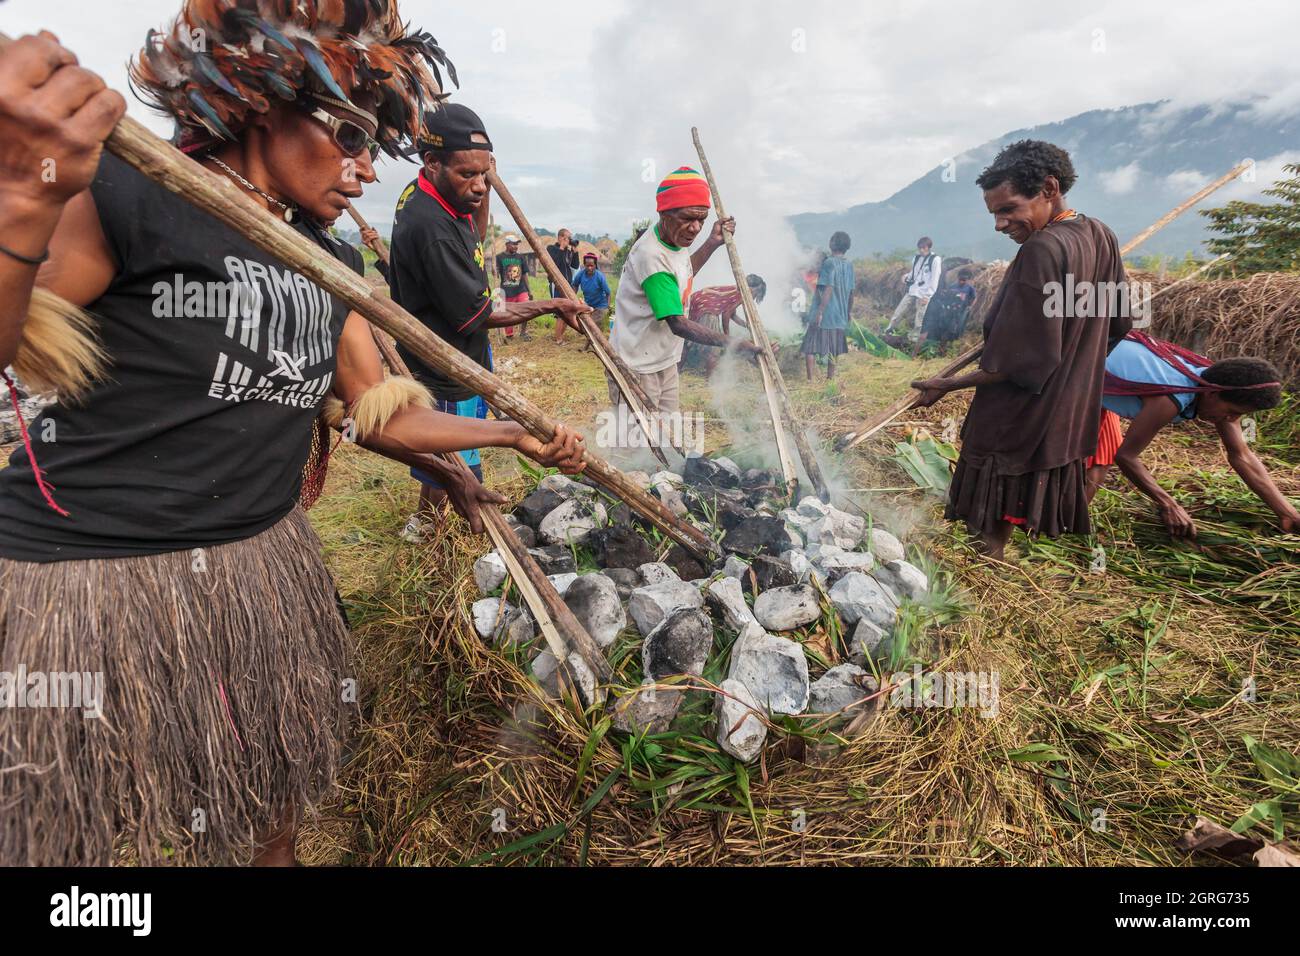 Indonesia, Papua, city of Wamena, members of the Dani tribe perform traditional cooking of sweet potatoes in an earth oven, with stones heated by wood fire and wrapped in plant leaves. Baliem Valley Cultural Festival, every August, tribes come together to perform ancestral war scenes, parade and dance in traditional clothes Stock Photo